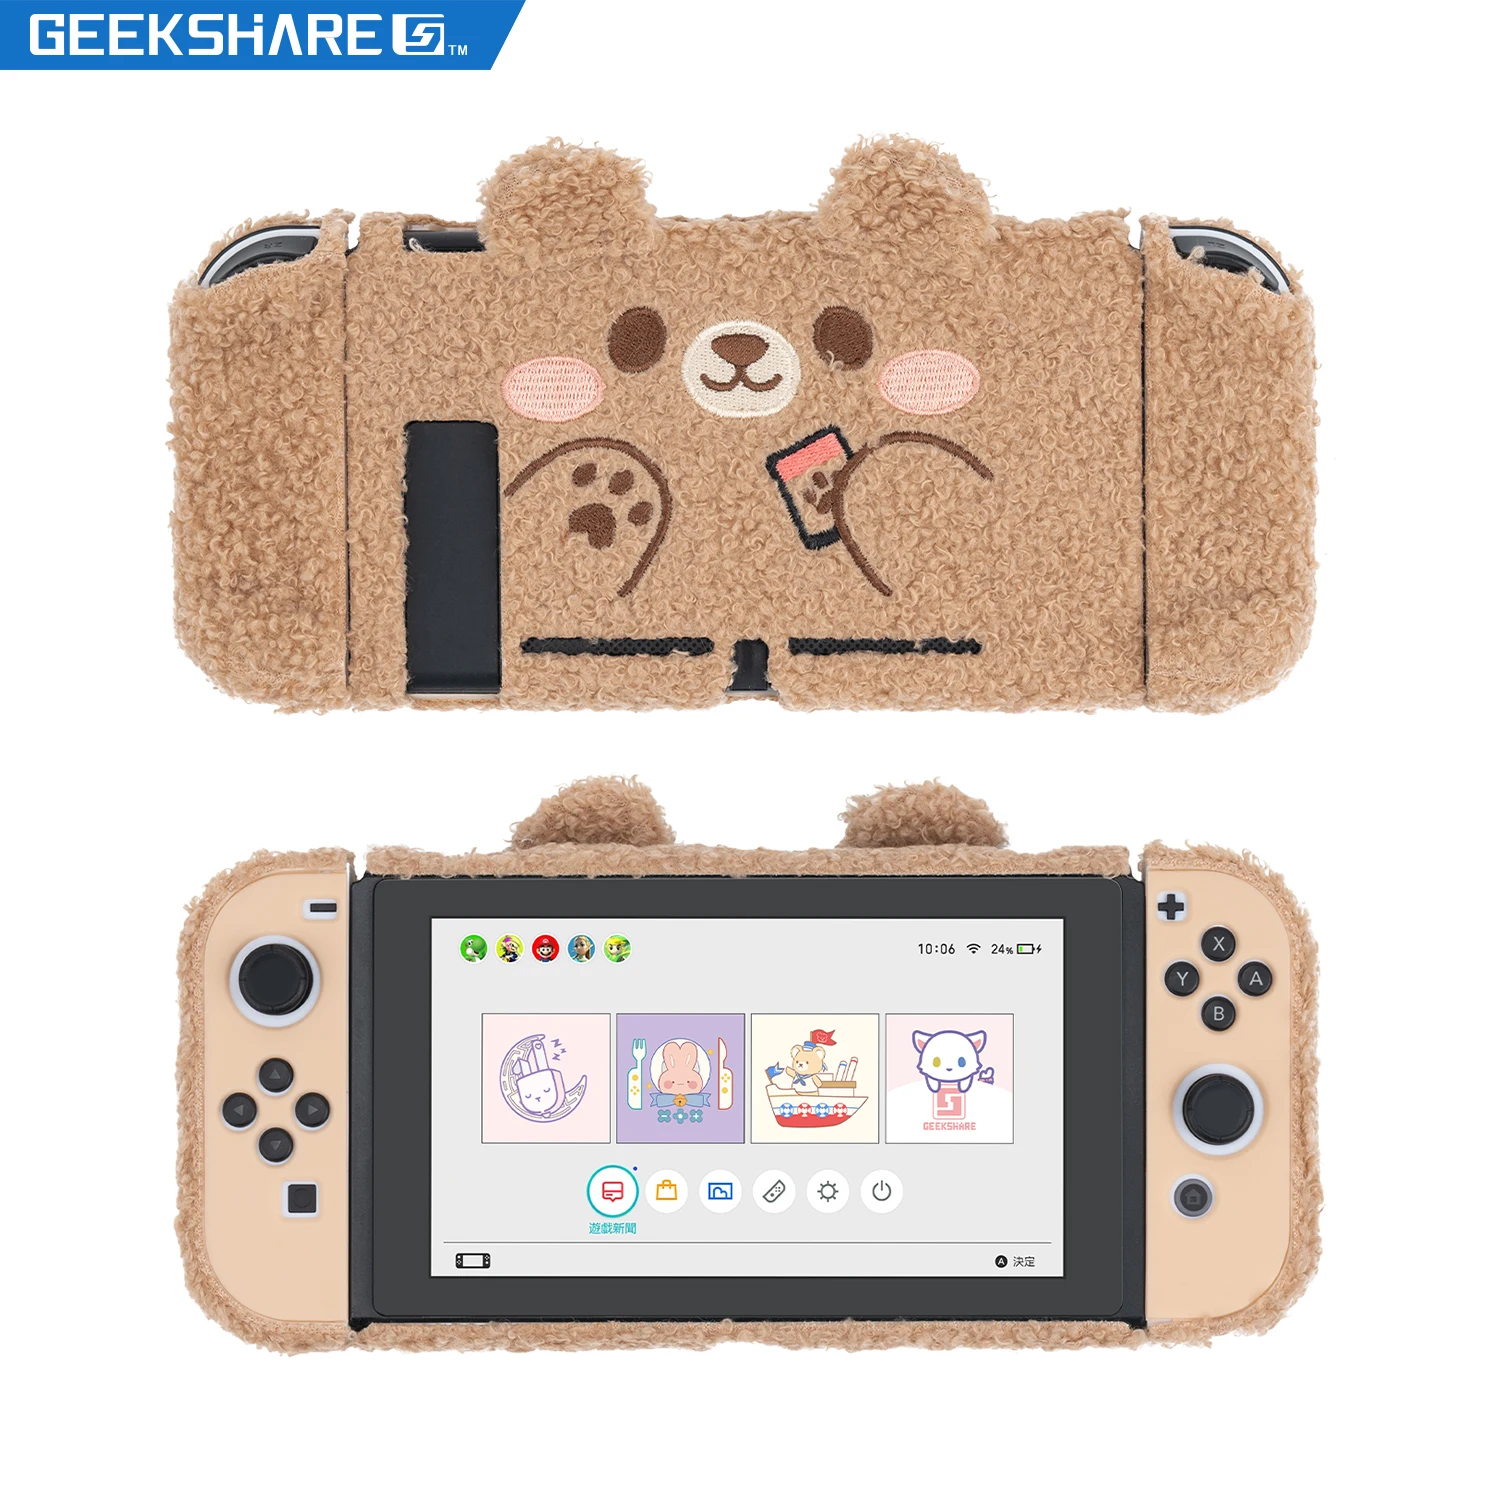 GeekShare Protective Case For Nintendo Switch Cute Bear Plush Nintendo Switch Hard Shell Split Joy-con Cover For NS Accessories